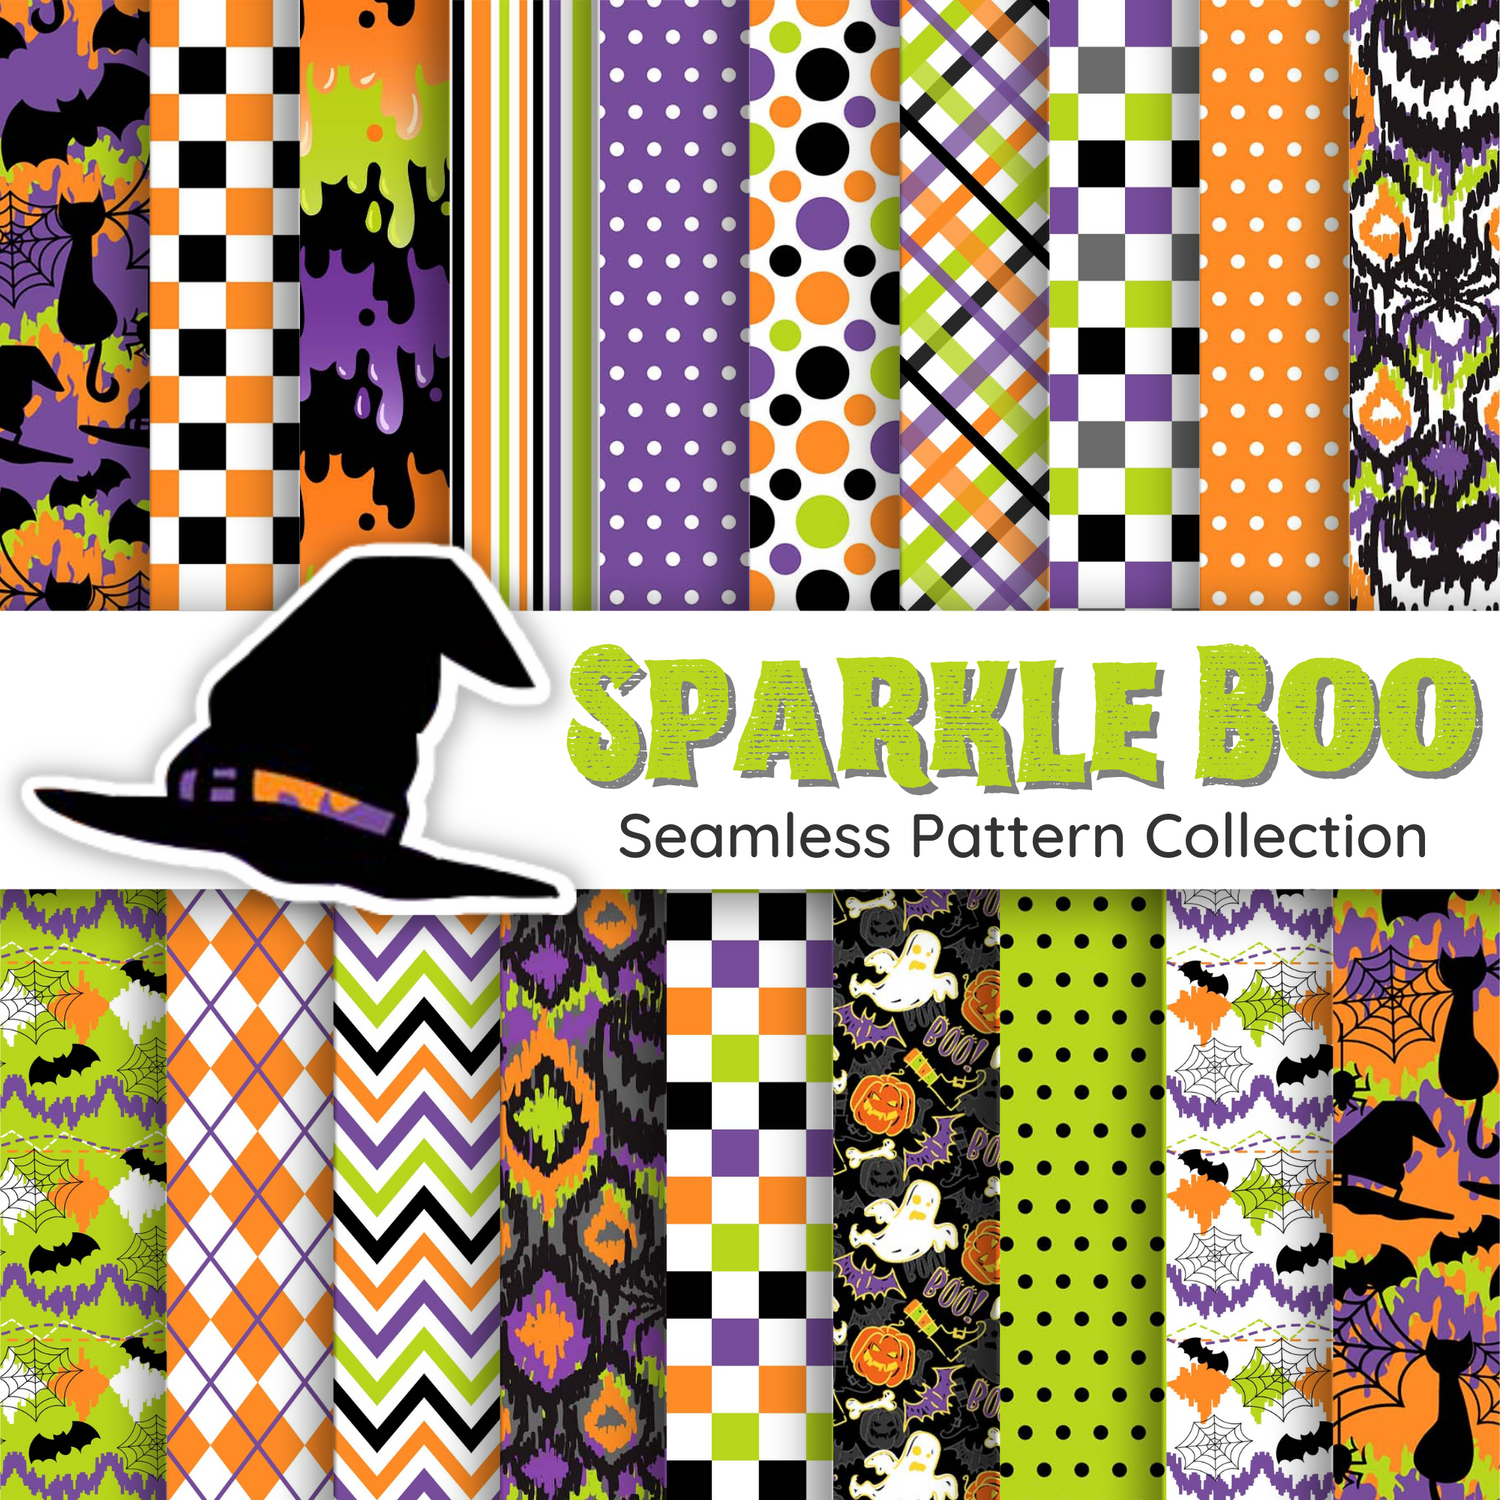 "Sparkle Boo" Digital Collection